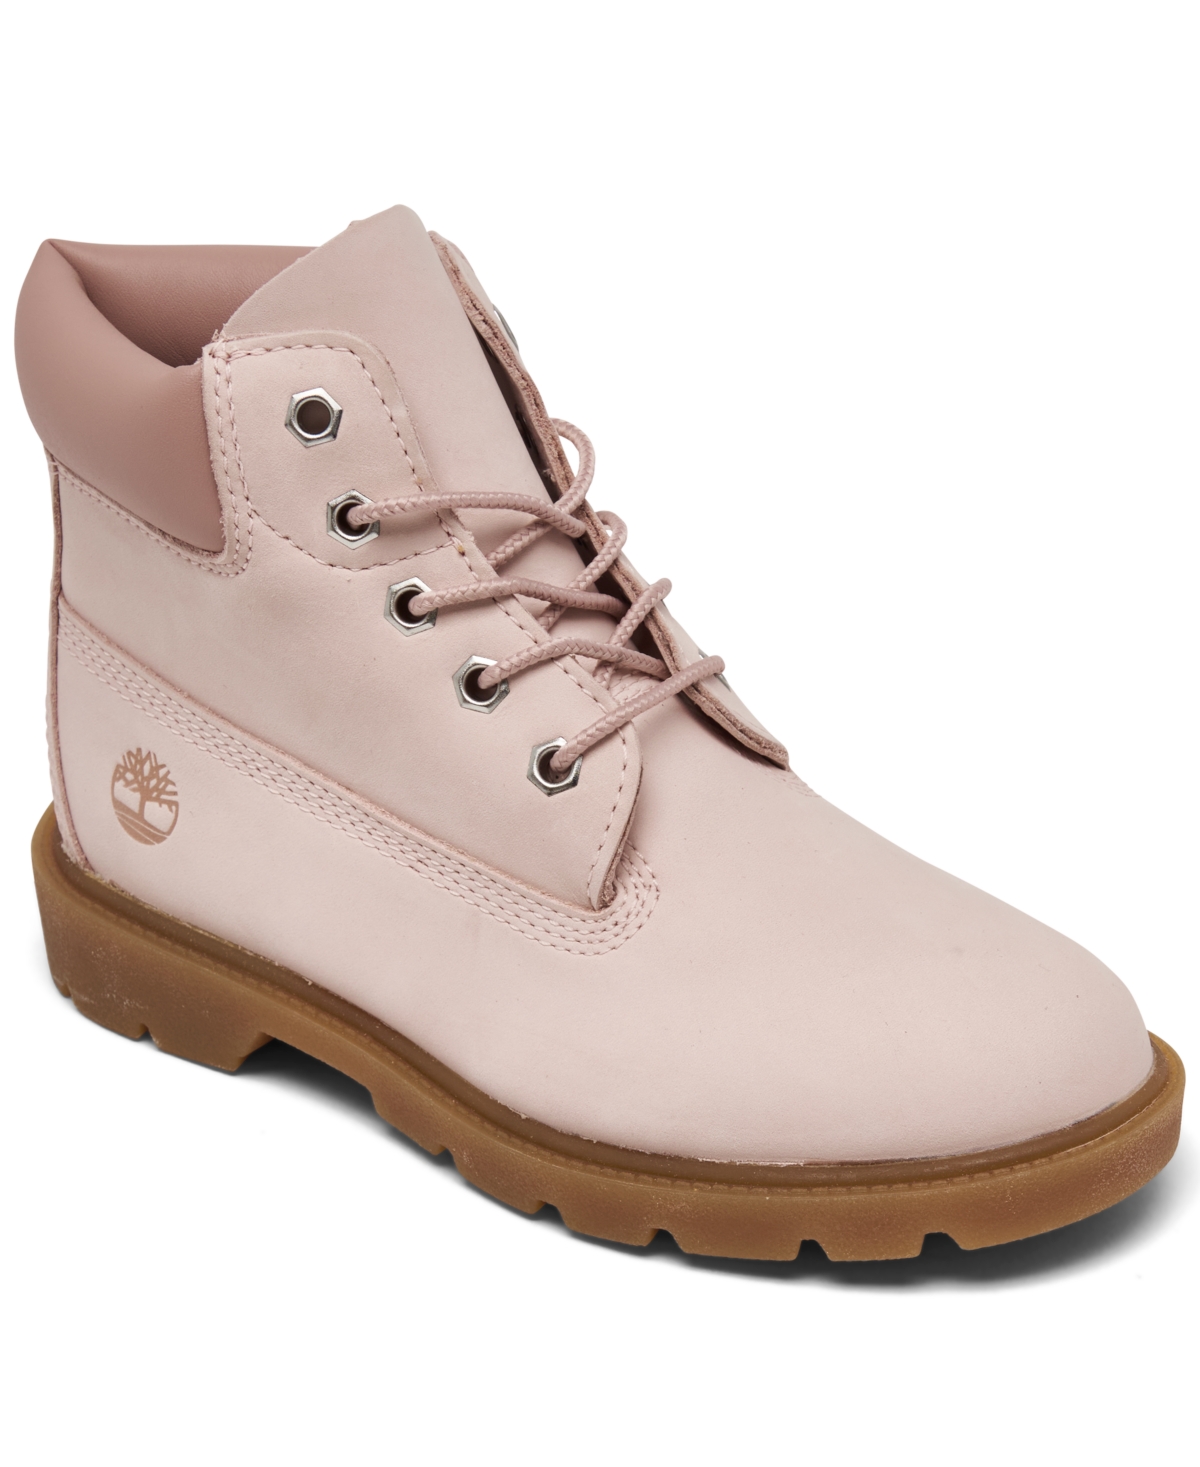 Timberland Kids' Little Girls 6" Classic Water-resistant Boots From Finish Line In Chintz Rose